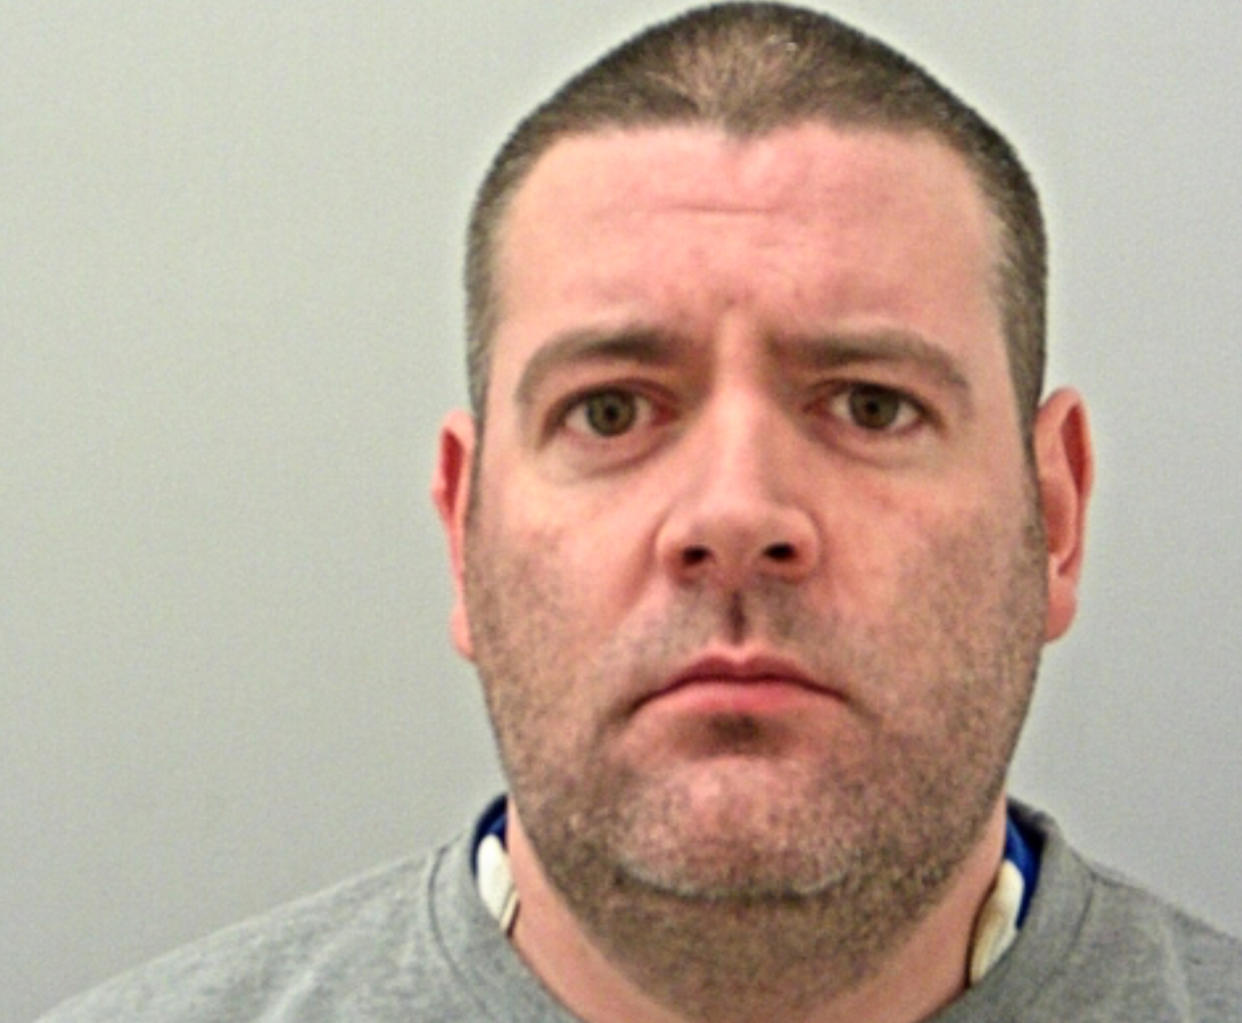 James White has been jailed after he sexually assaulted a teenage girl. (SWNS)